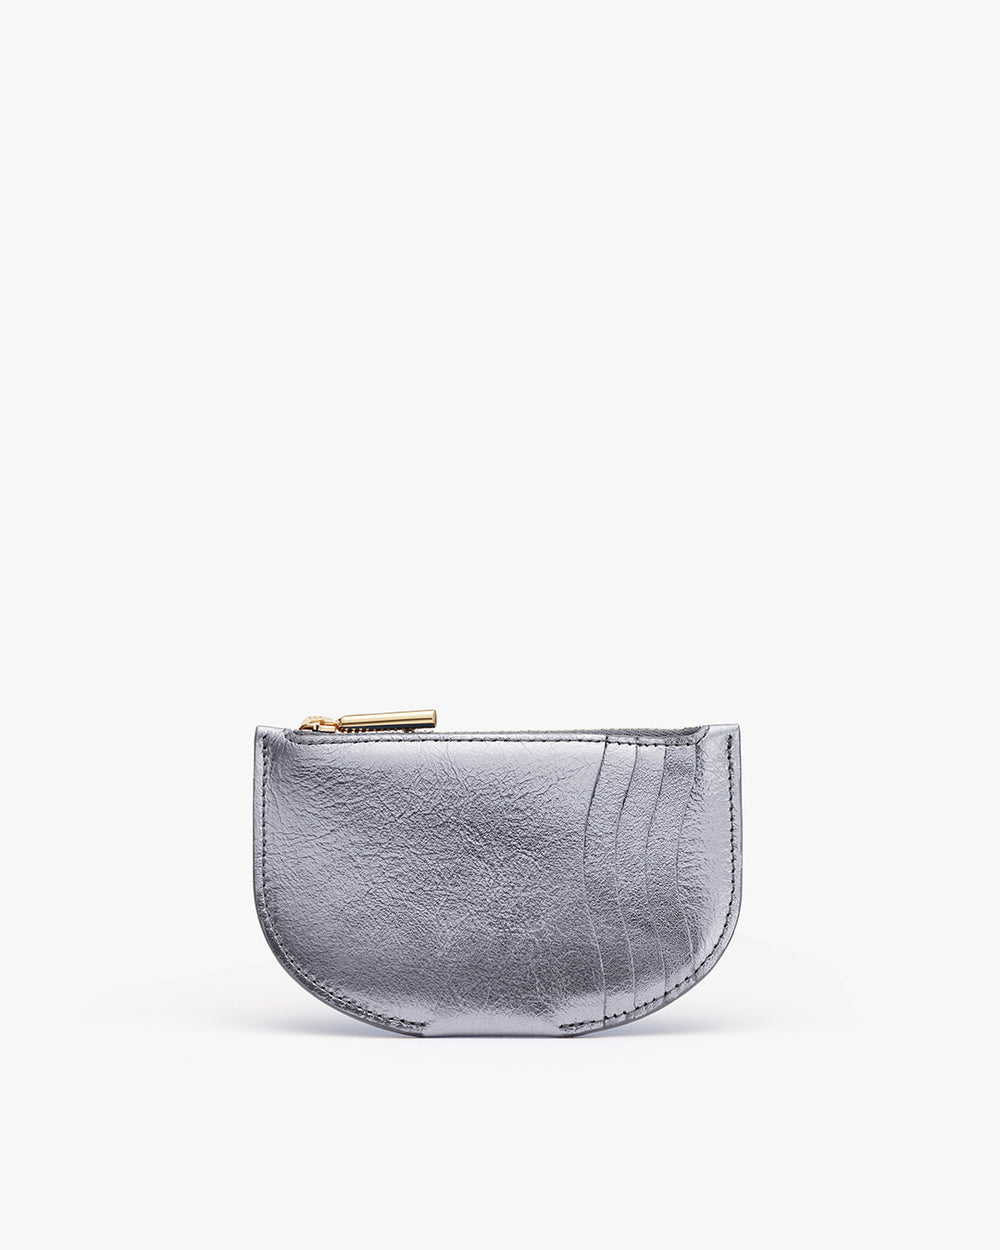 Small purse with a zipper on a plain background